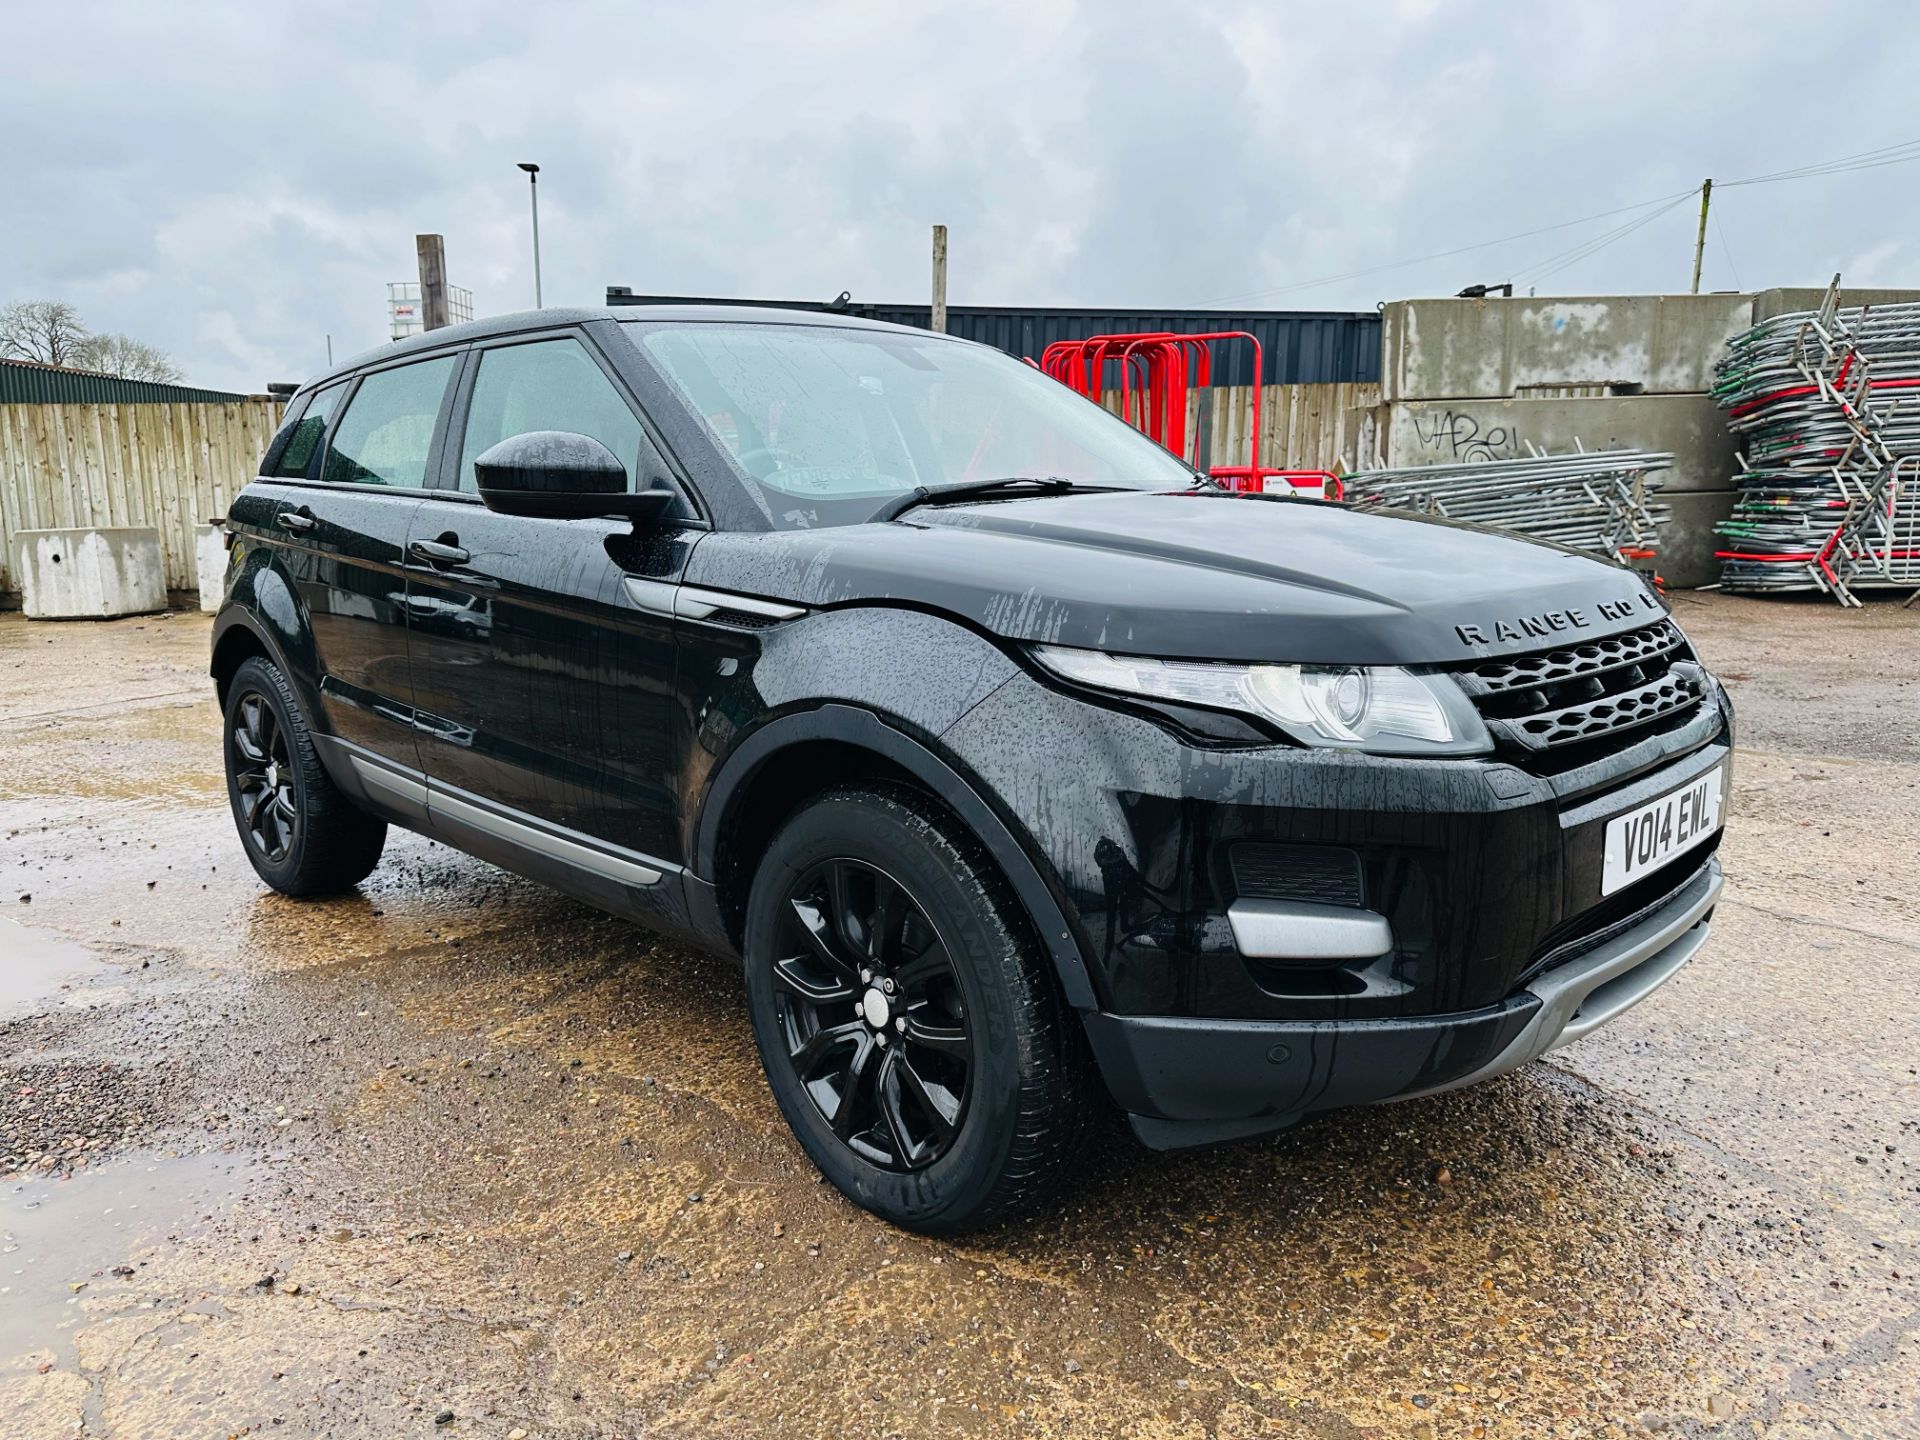 (RESERVE MET) LAND ROVER EVOQUE PURE 2.2 ED4 *TECH PACK* AIR CON - FULL LEATHER INTERIOR - NO VAT - Image 2 of 43